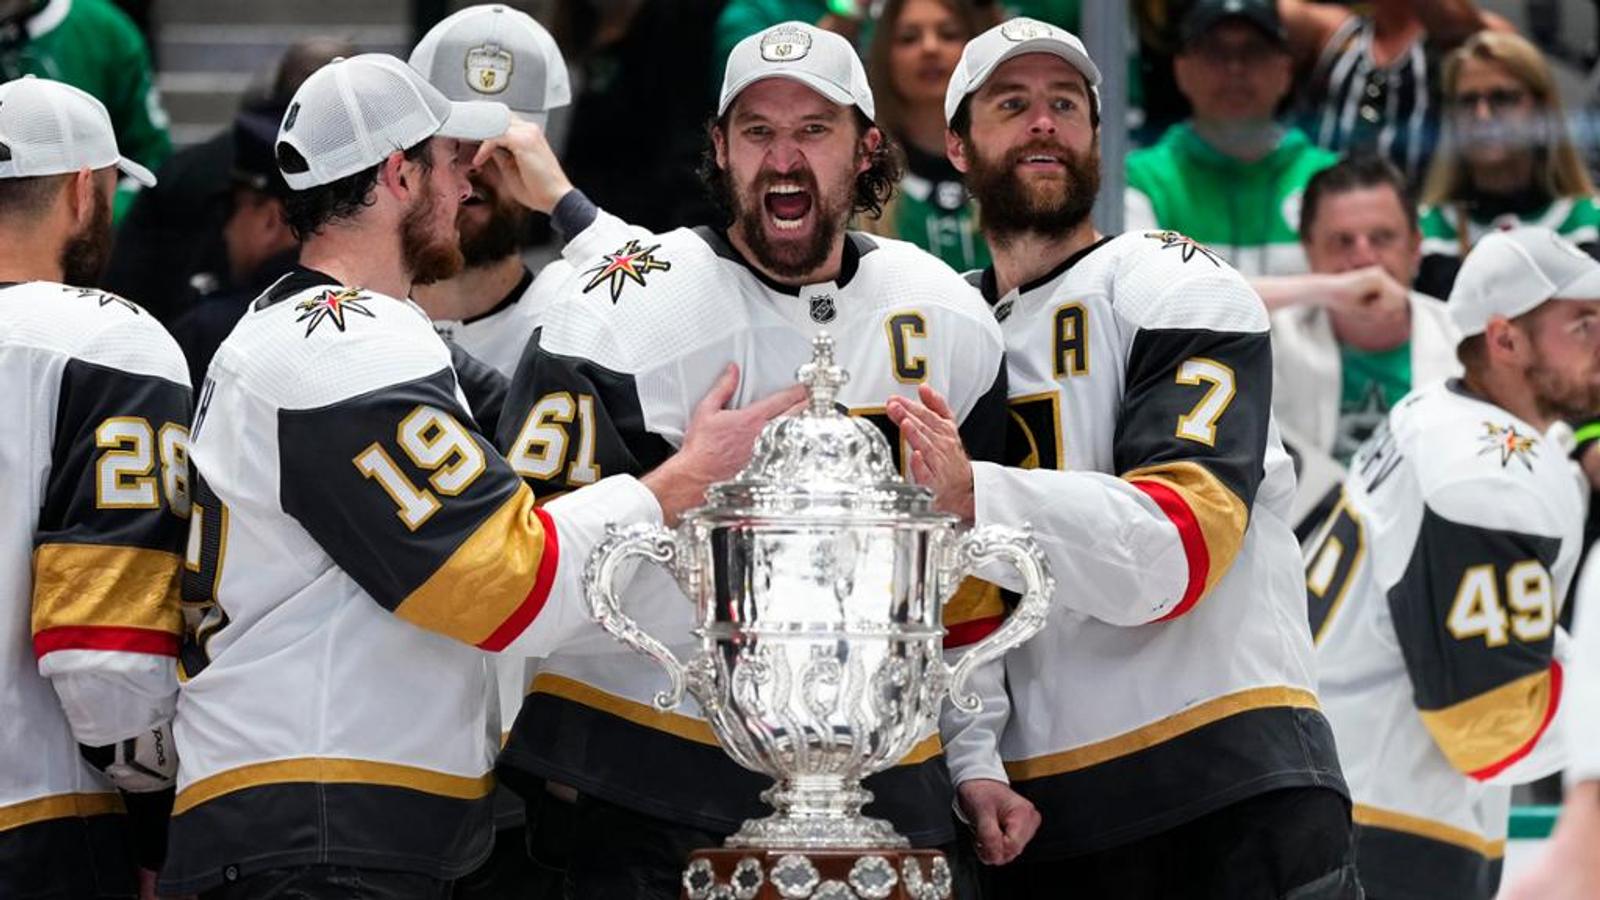 Golden Knights get offered ‘free lap dances for life’ to win the Stanley Cup